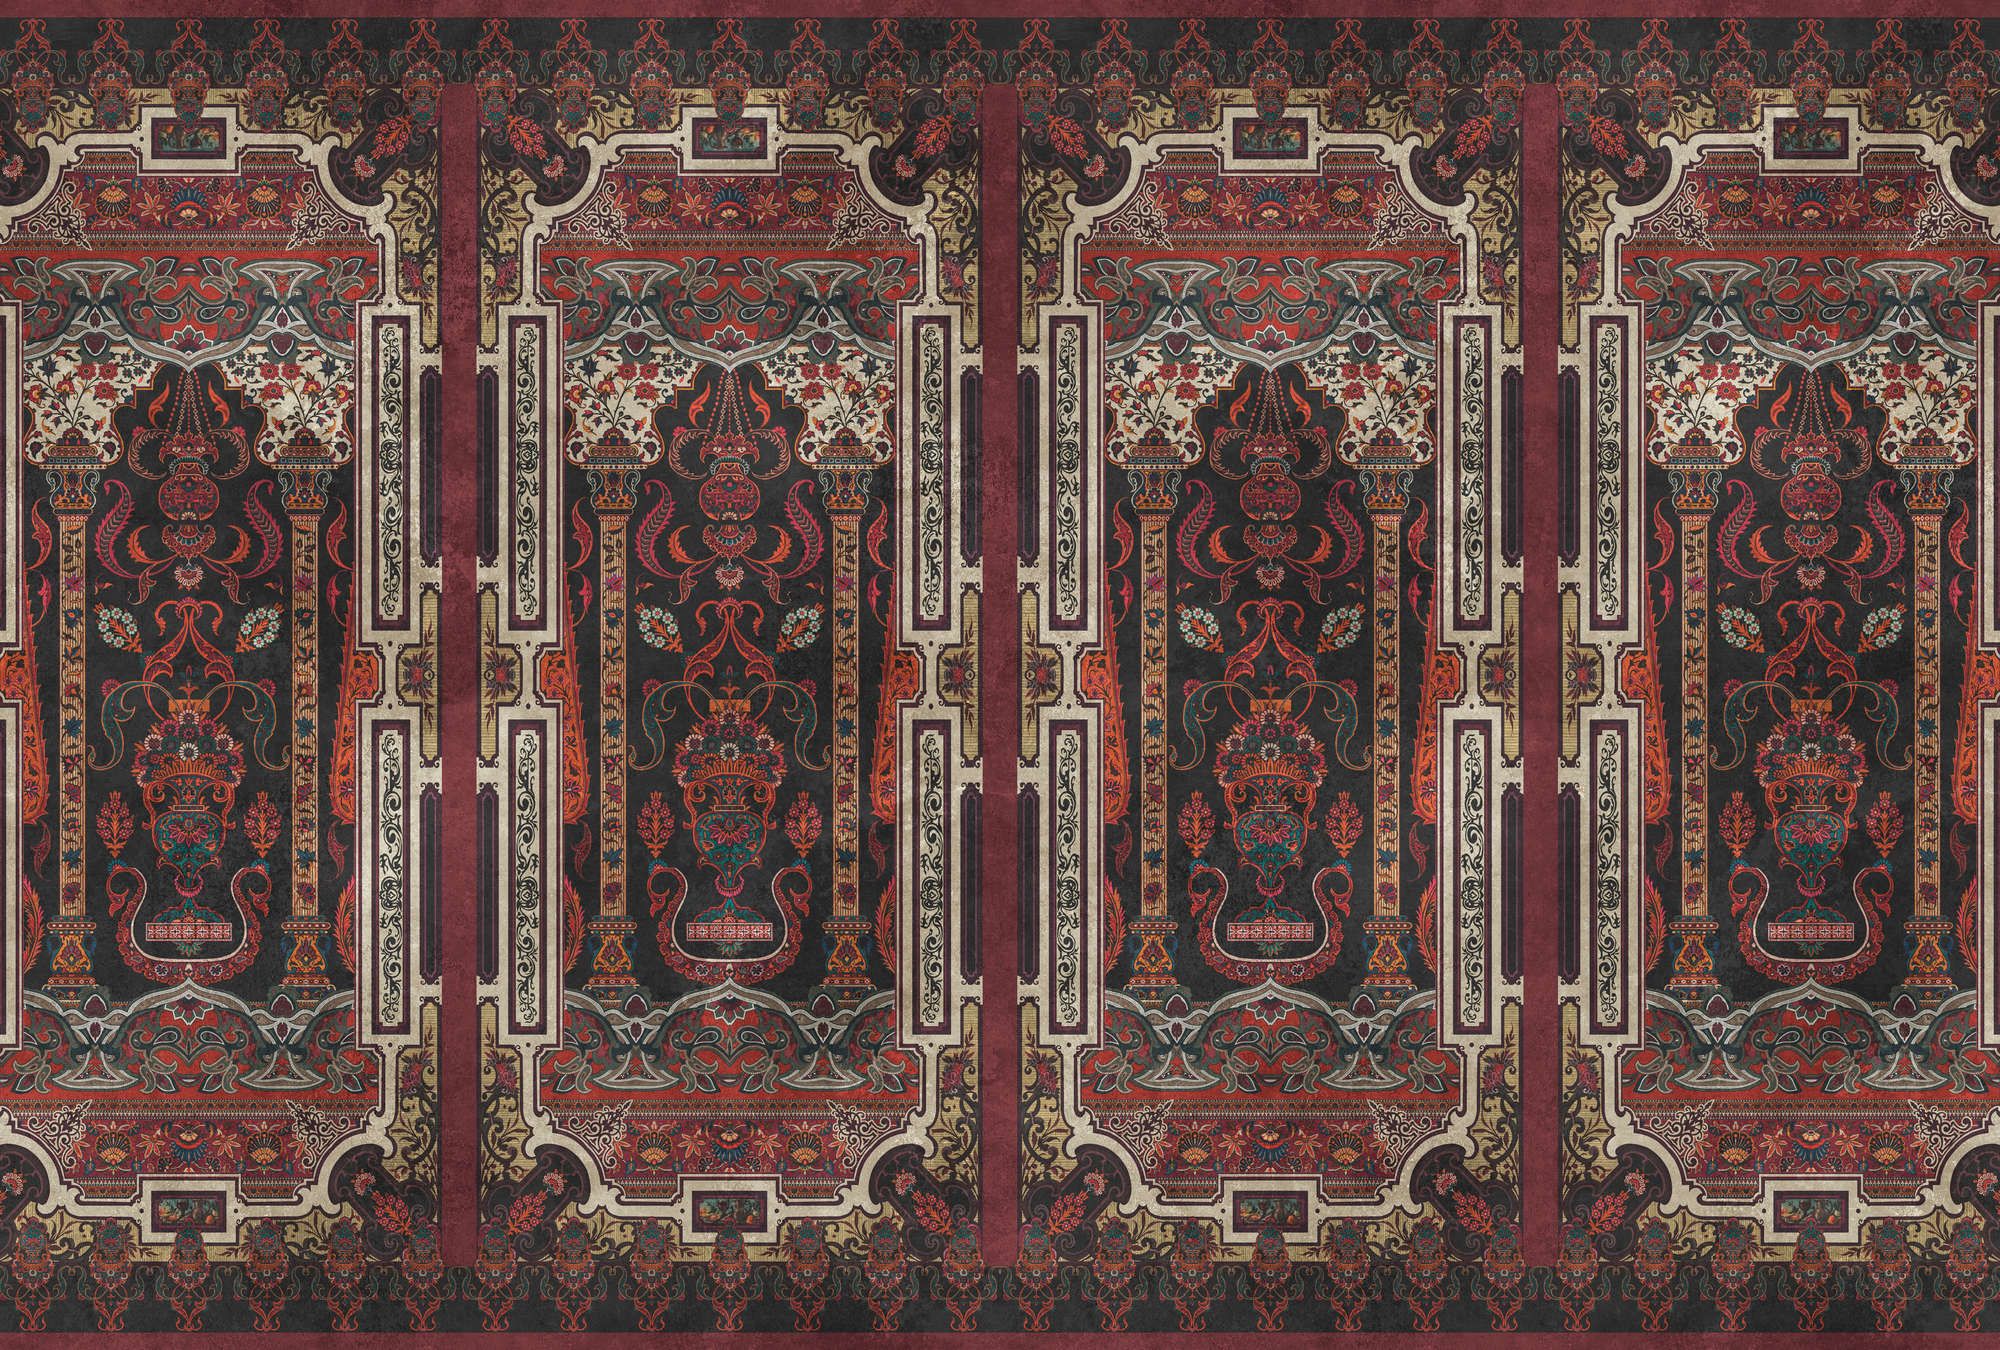             Photo wallpaper »karim« - Ornamental panelling with vintage plaster texture - Dark red | Smooth, slightly pearlescent non-woven fabric
        